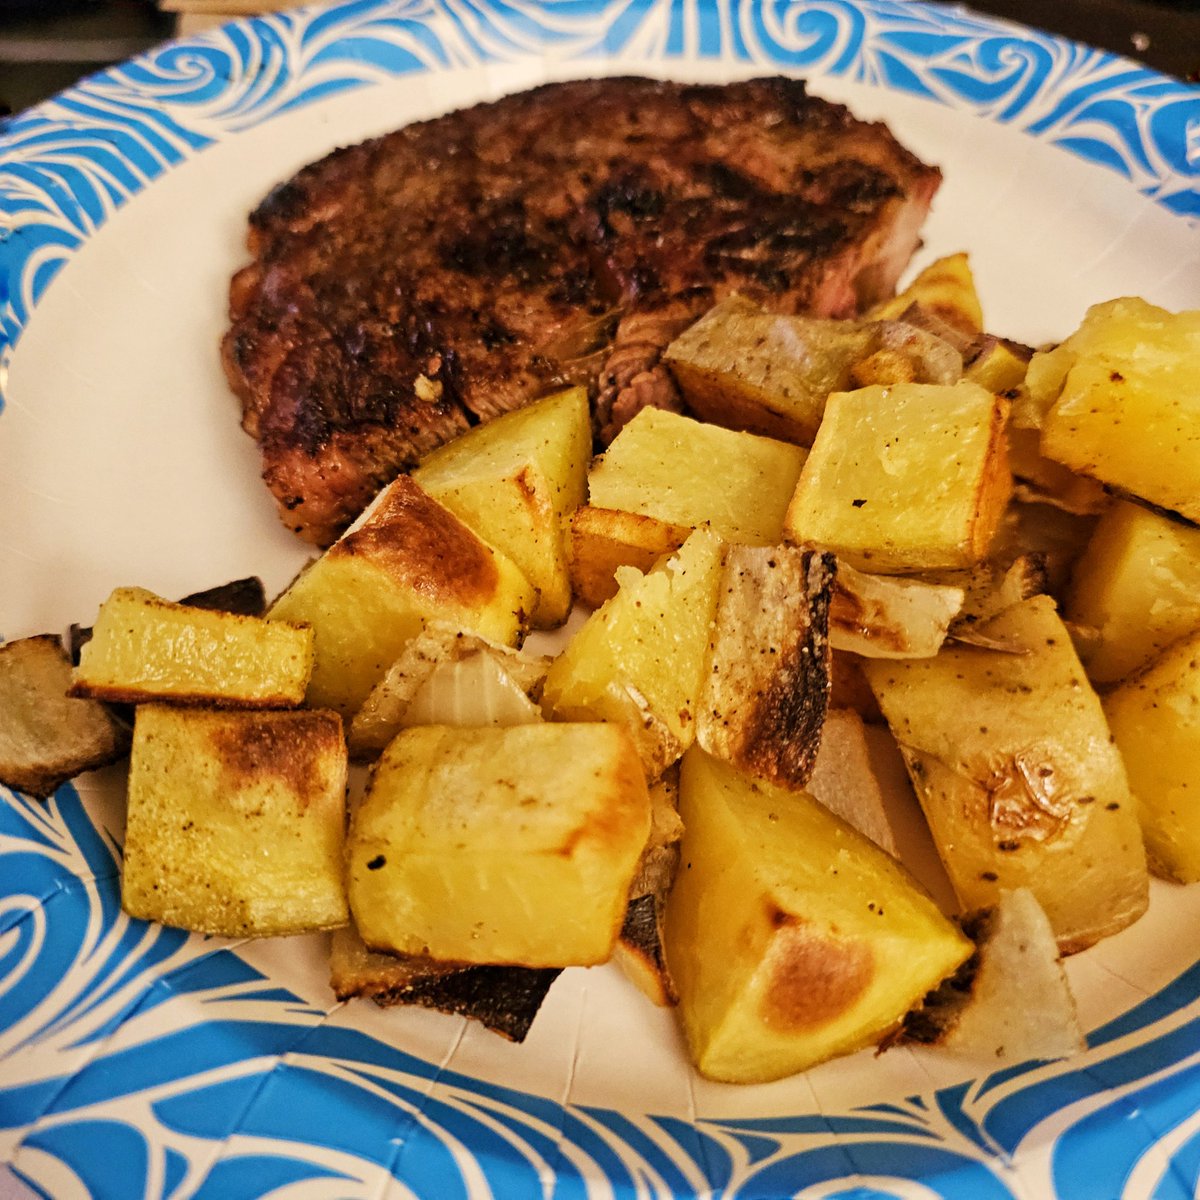 Yesterday's Dinner found Chef Kris had served Pan Seared Top Sirloin and Potatoes.